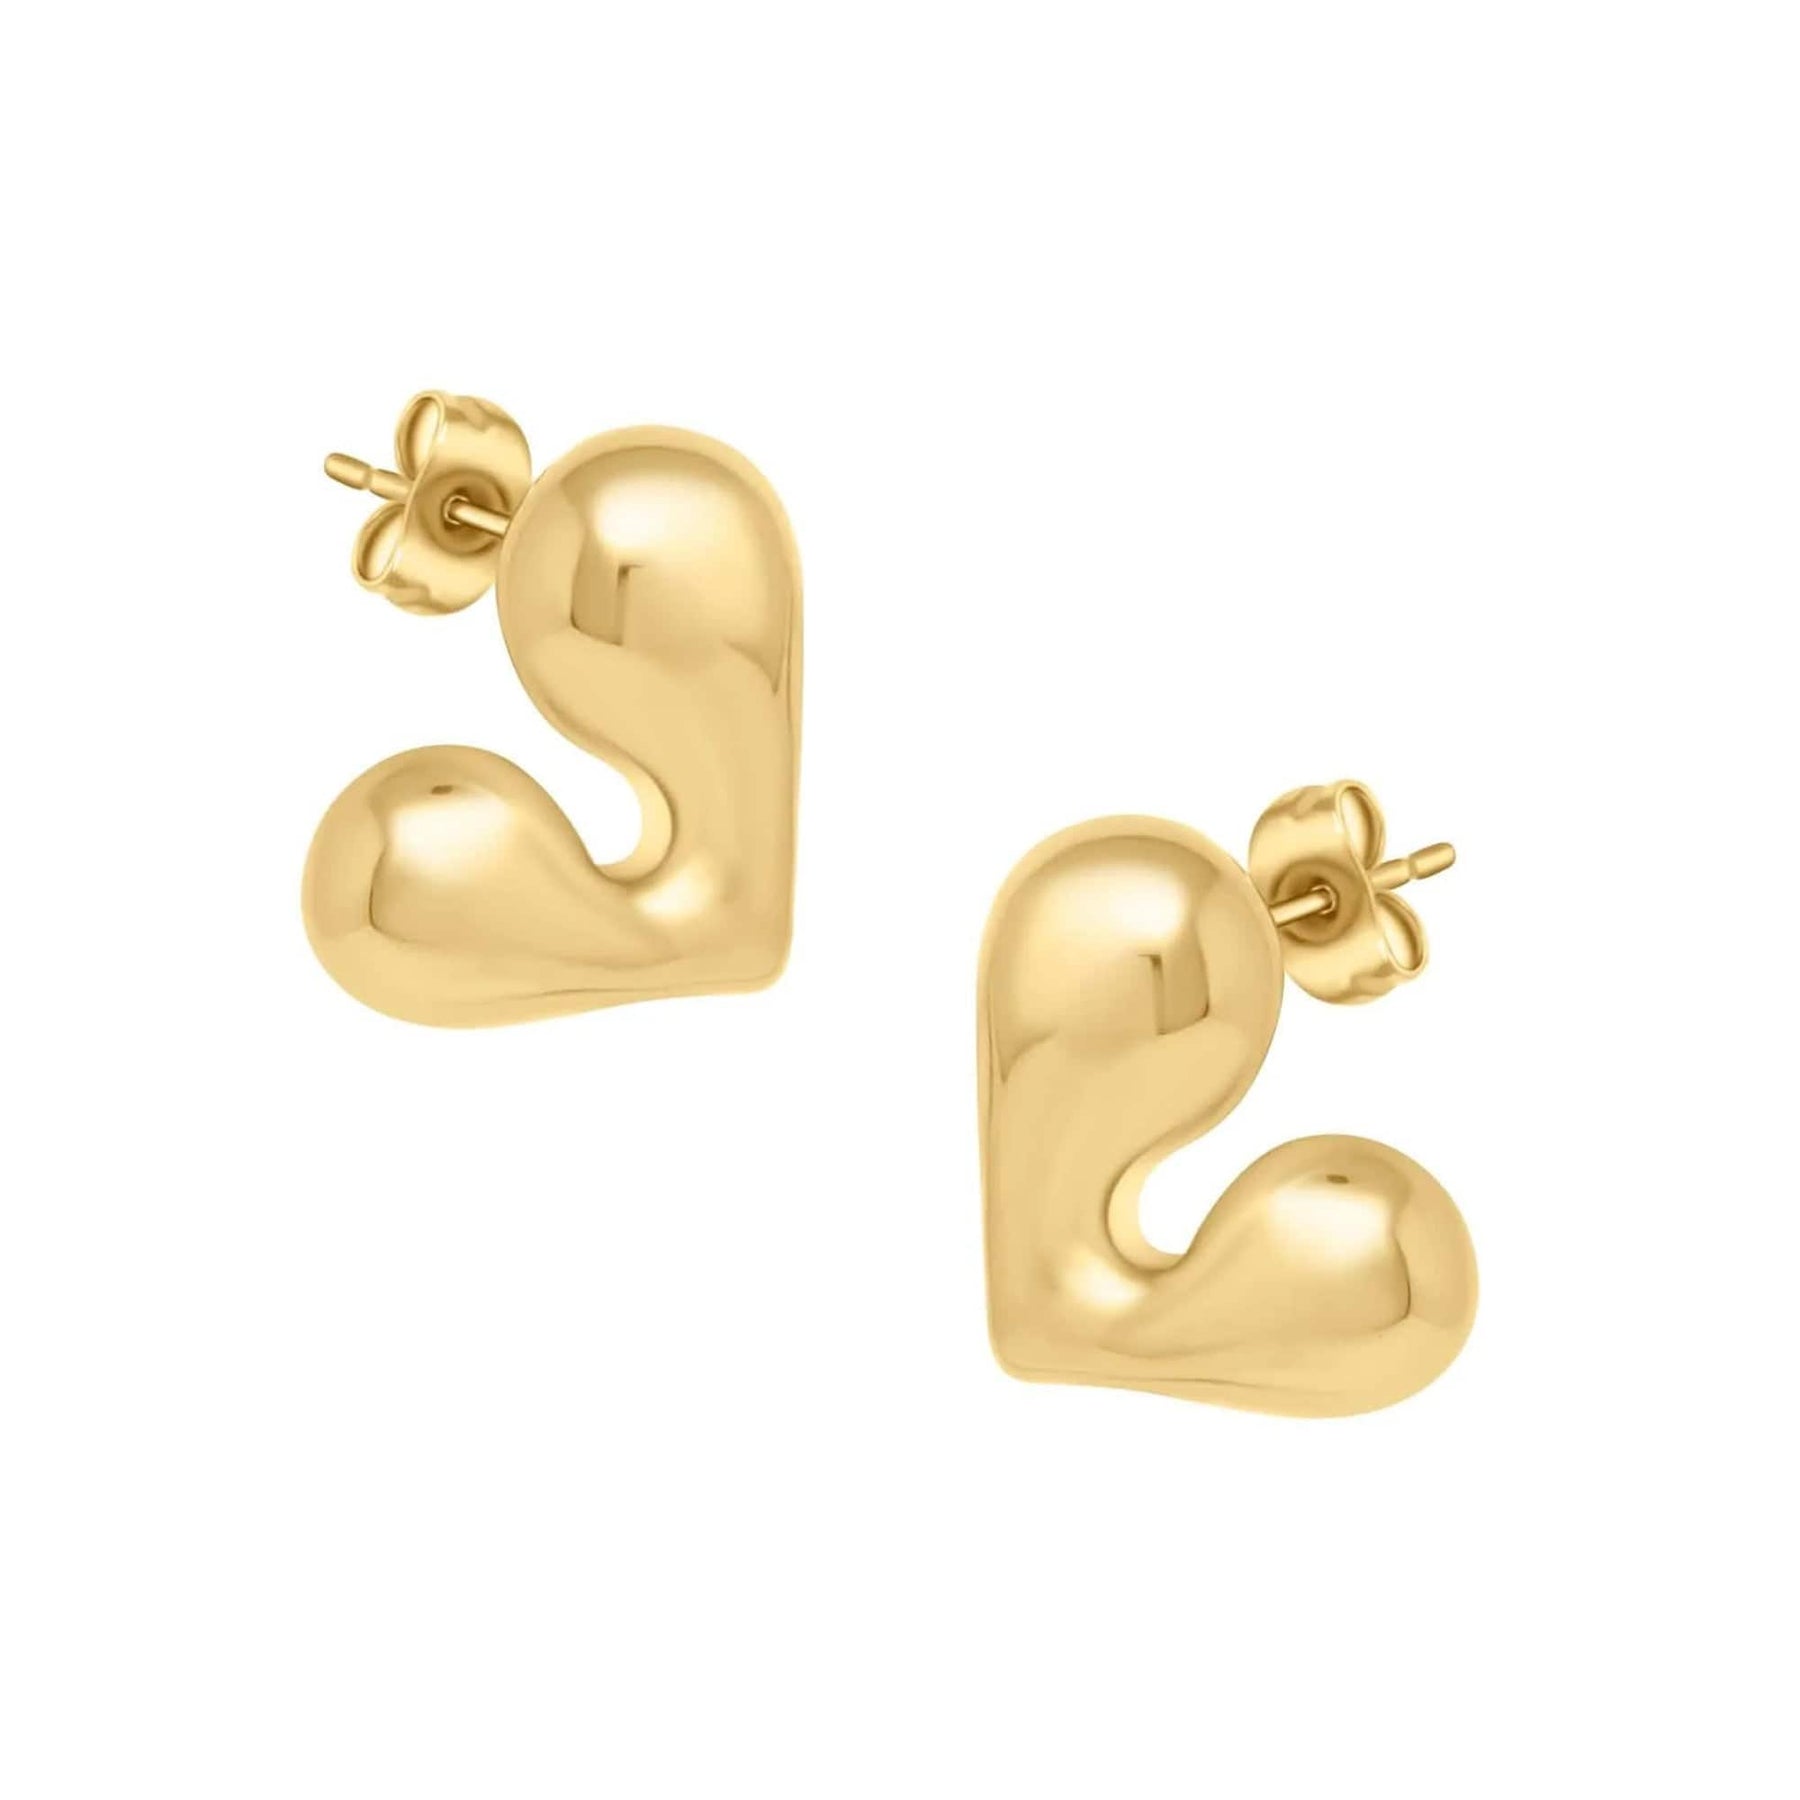 BohoMoon Stainless Steel Affection Stud Earrings Gold